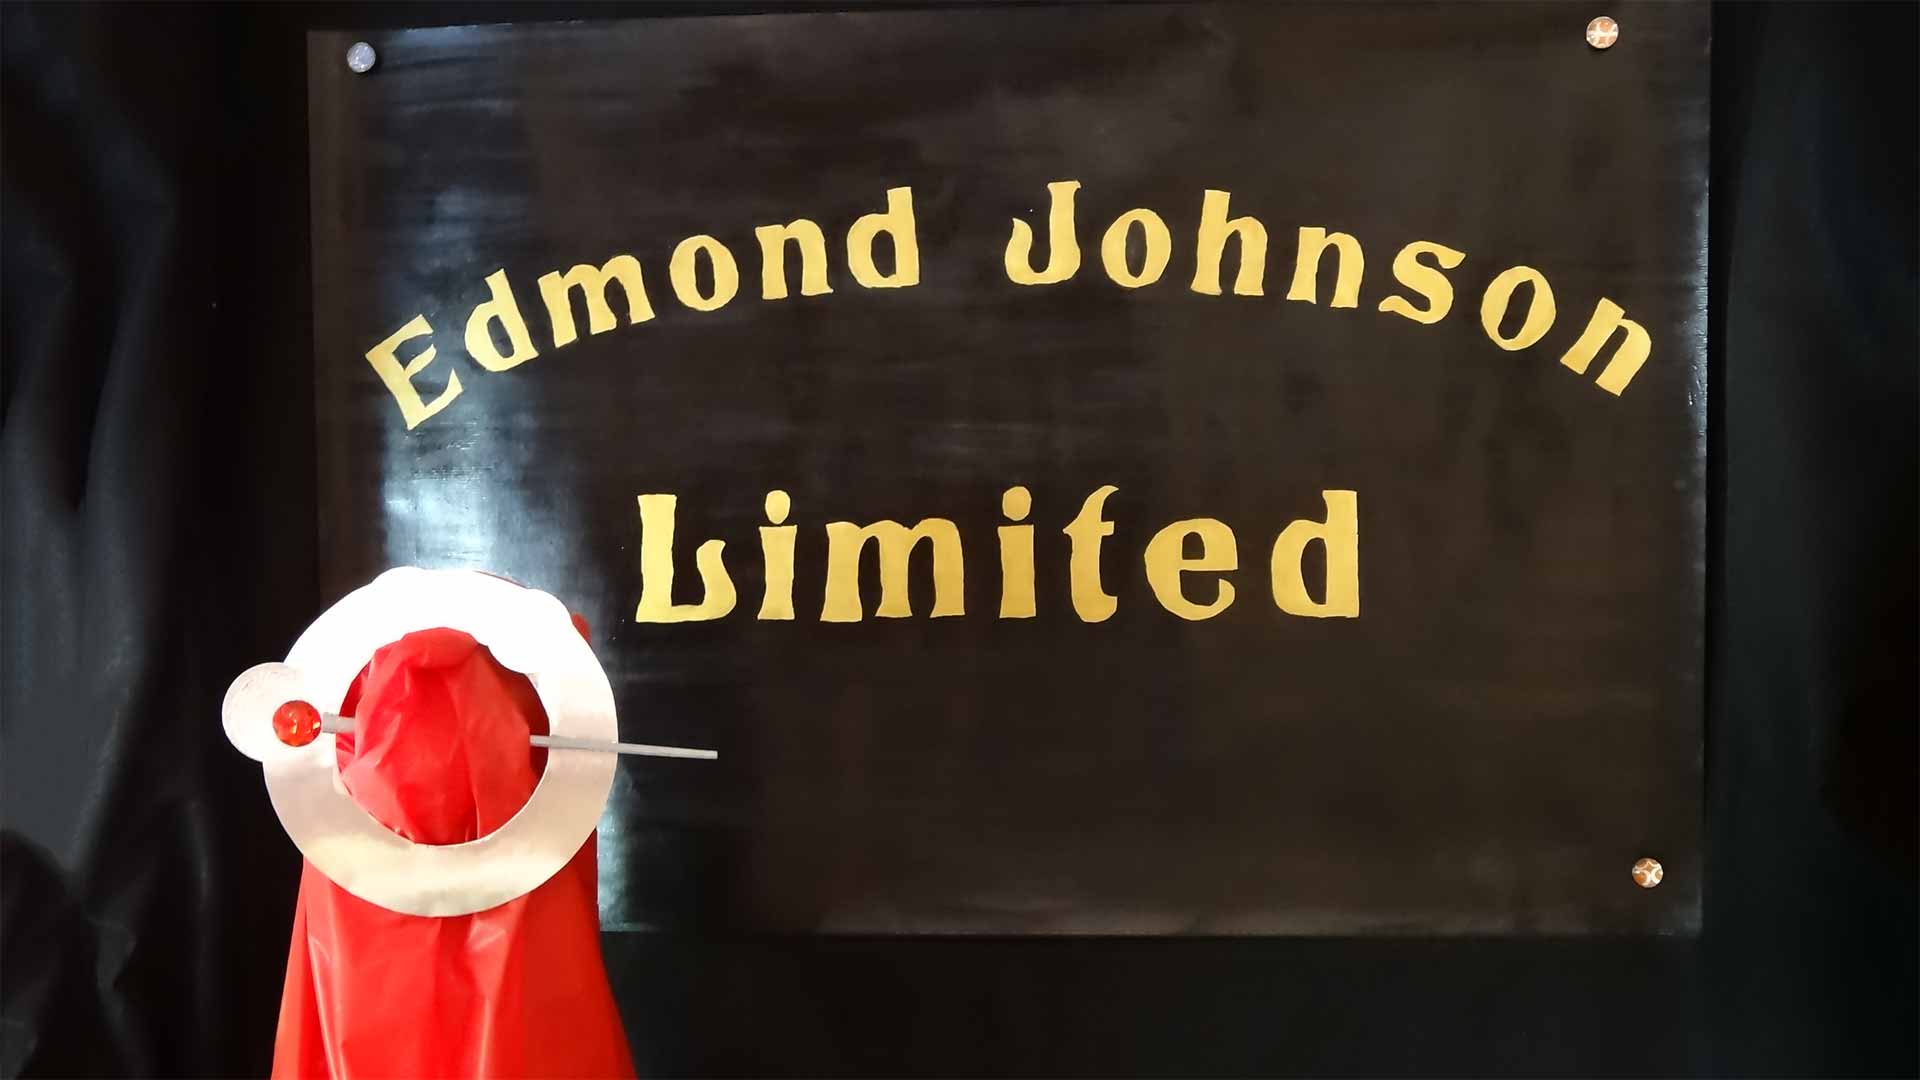 sign reading "edmond johnson limited" with a piece of fabric and pin brooch